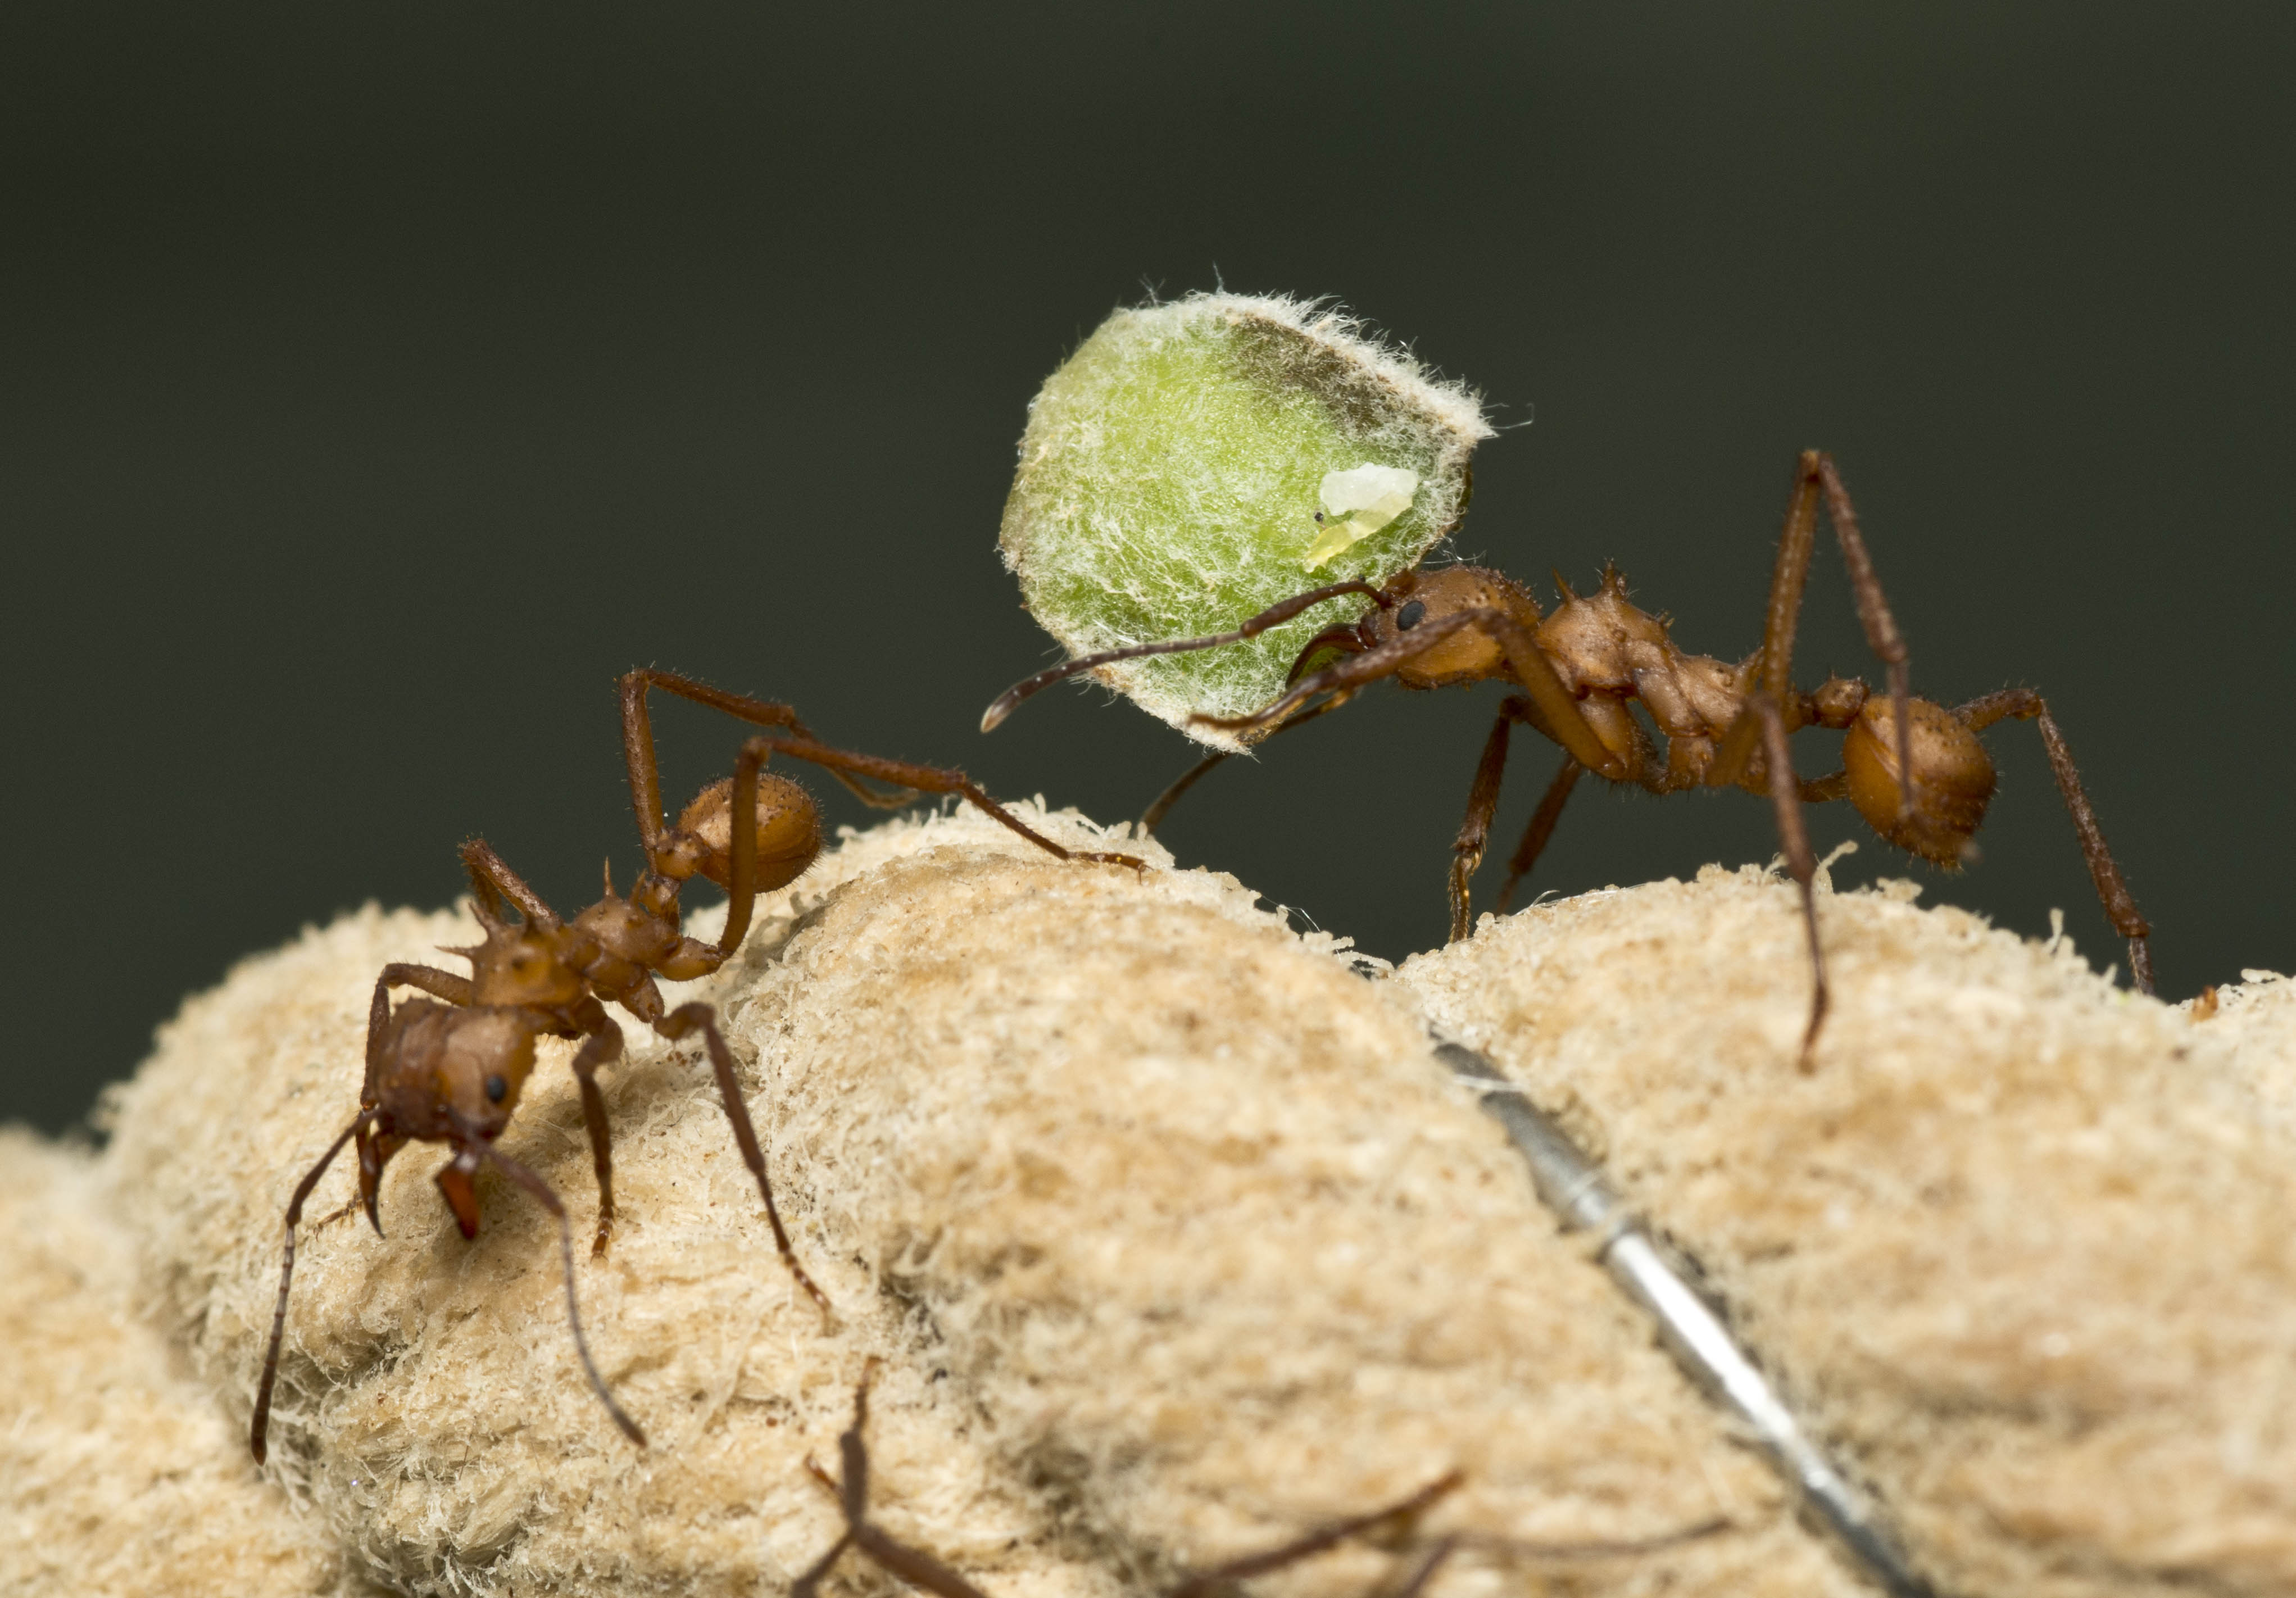 Ant carrying leaf fragments; from the exhibit 'Putting the Ant into Antibiotics'. Image Courtesy of John Innes Centre